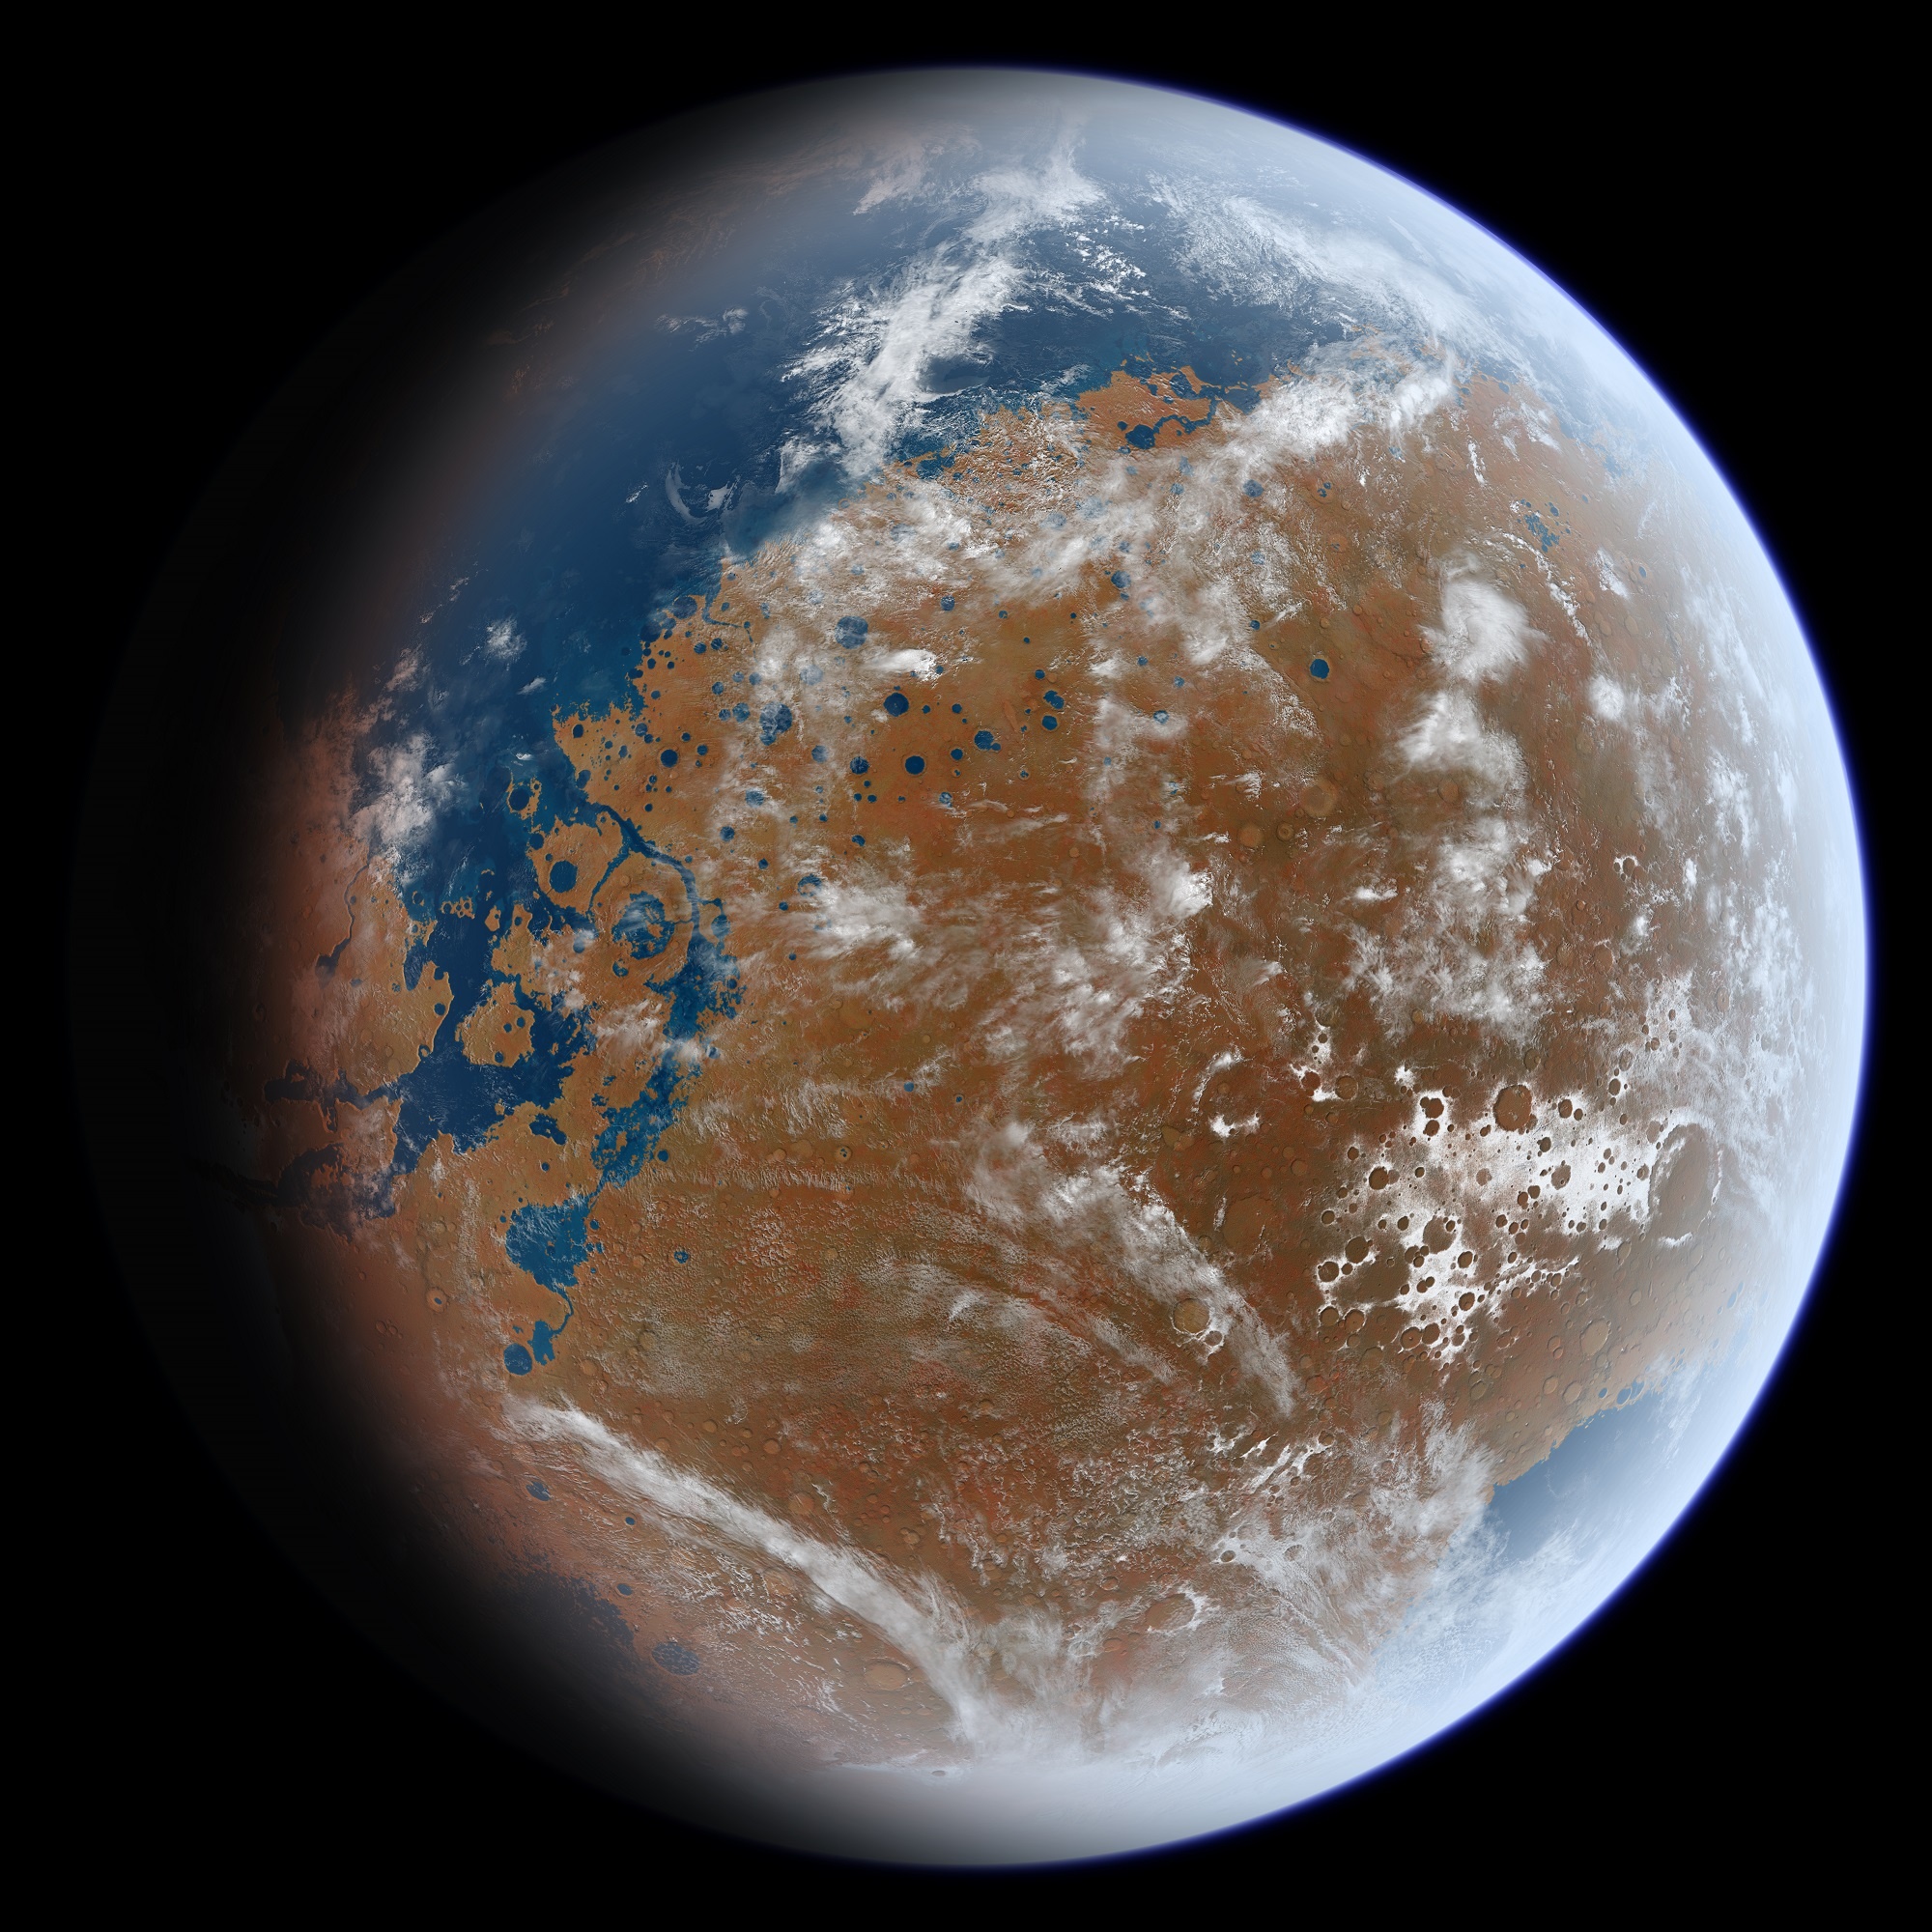 Mars Might Have Been Covered in Lakes in the Ancient Past